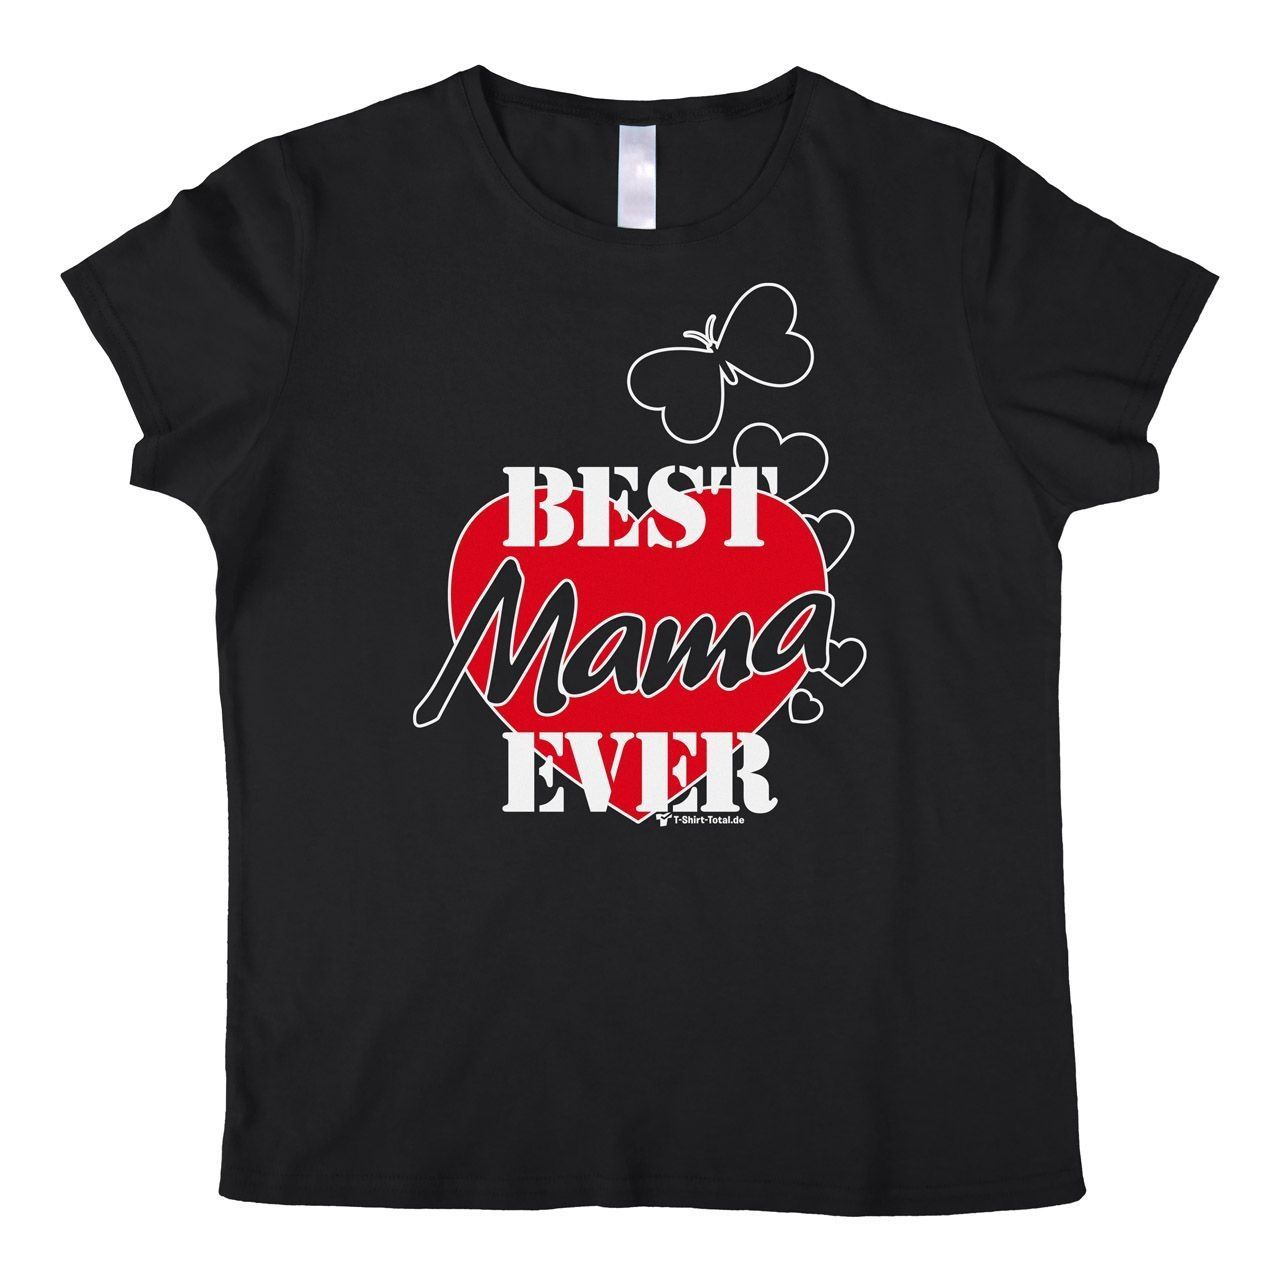 Best Mama ever Woman T-Shirt schwarz Extra Large